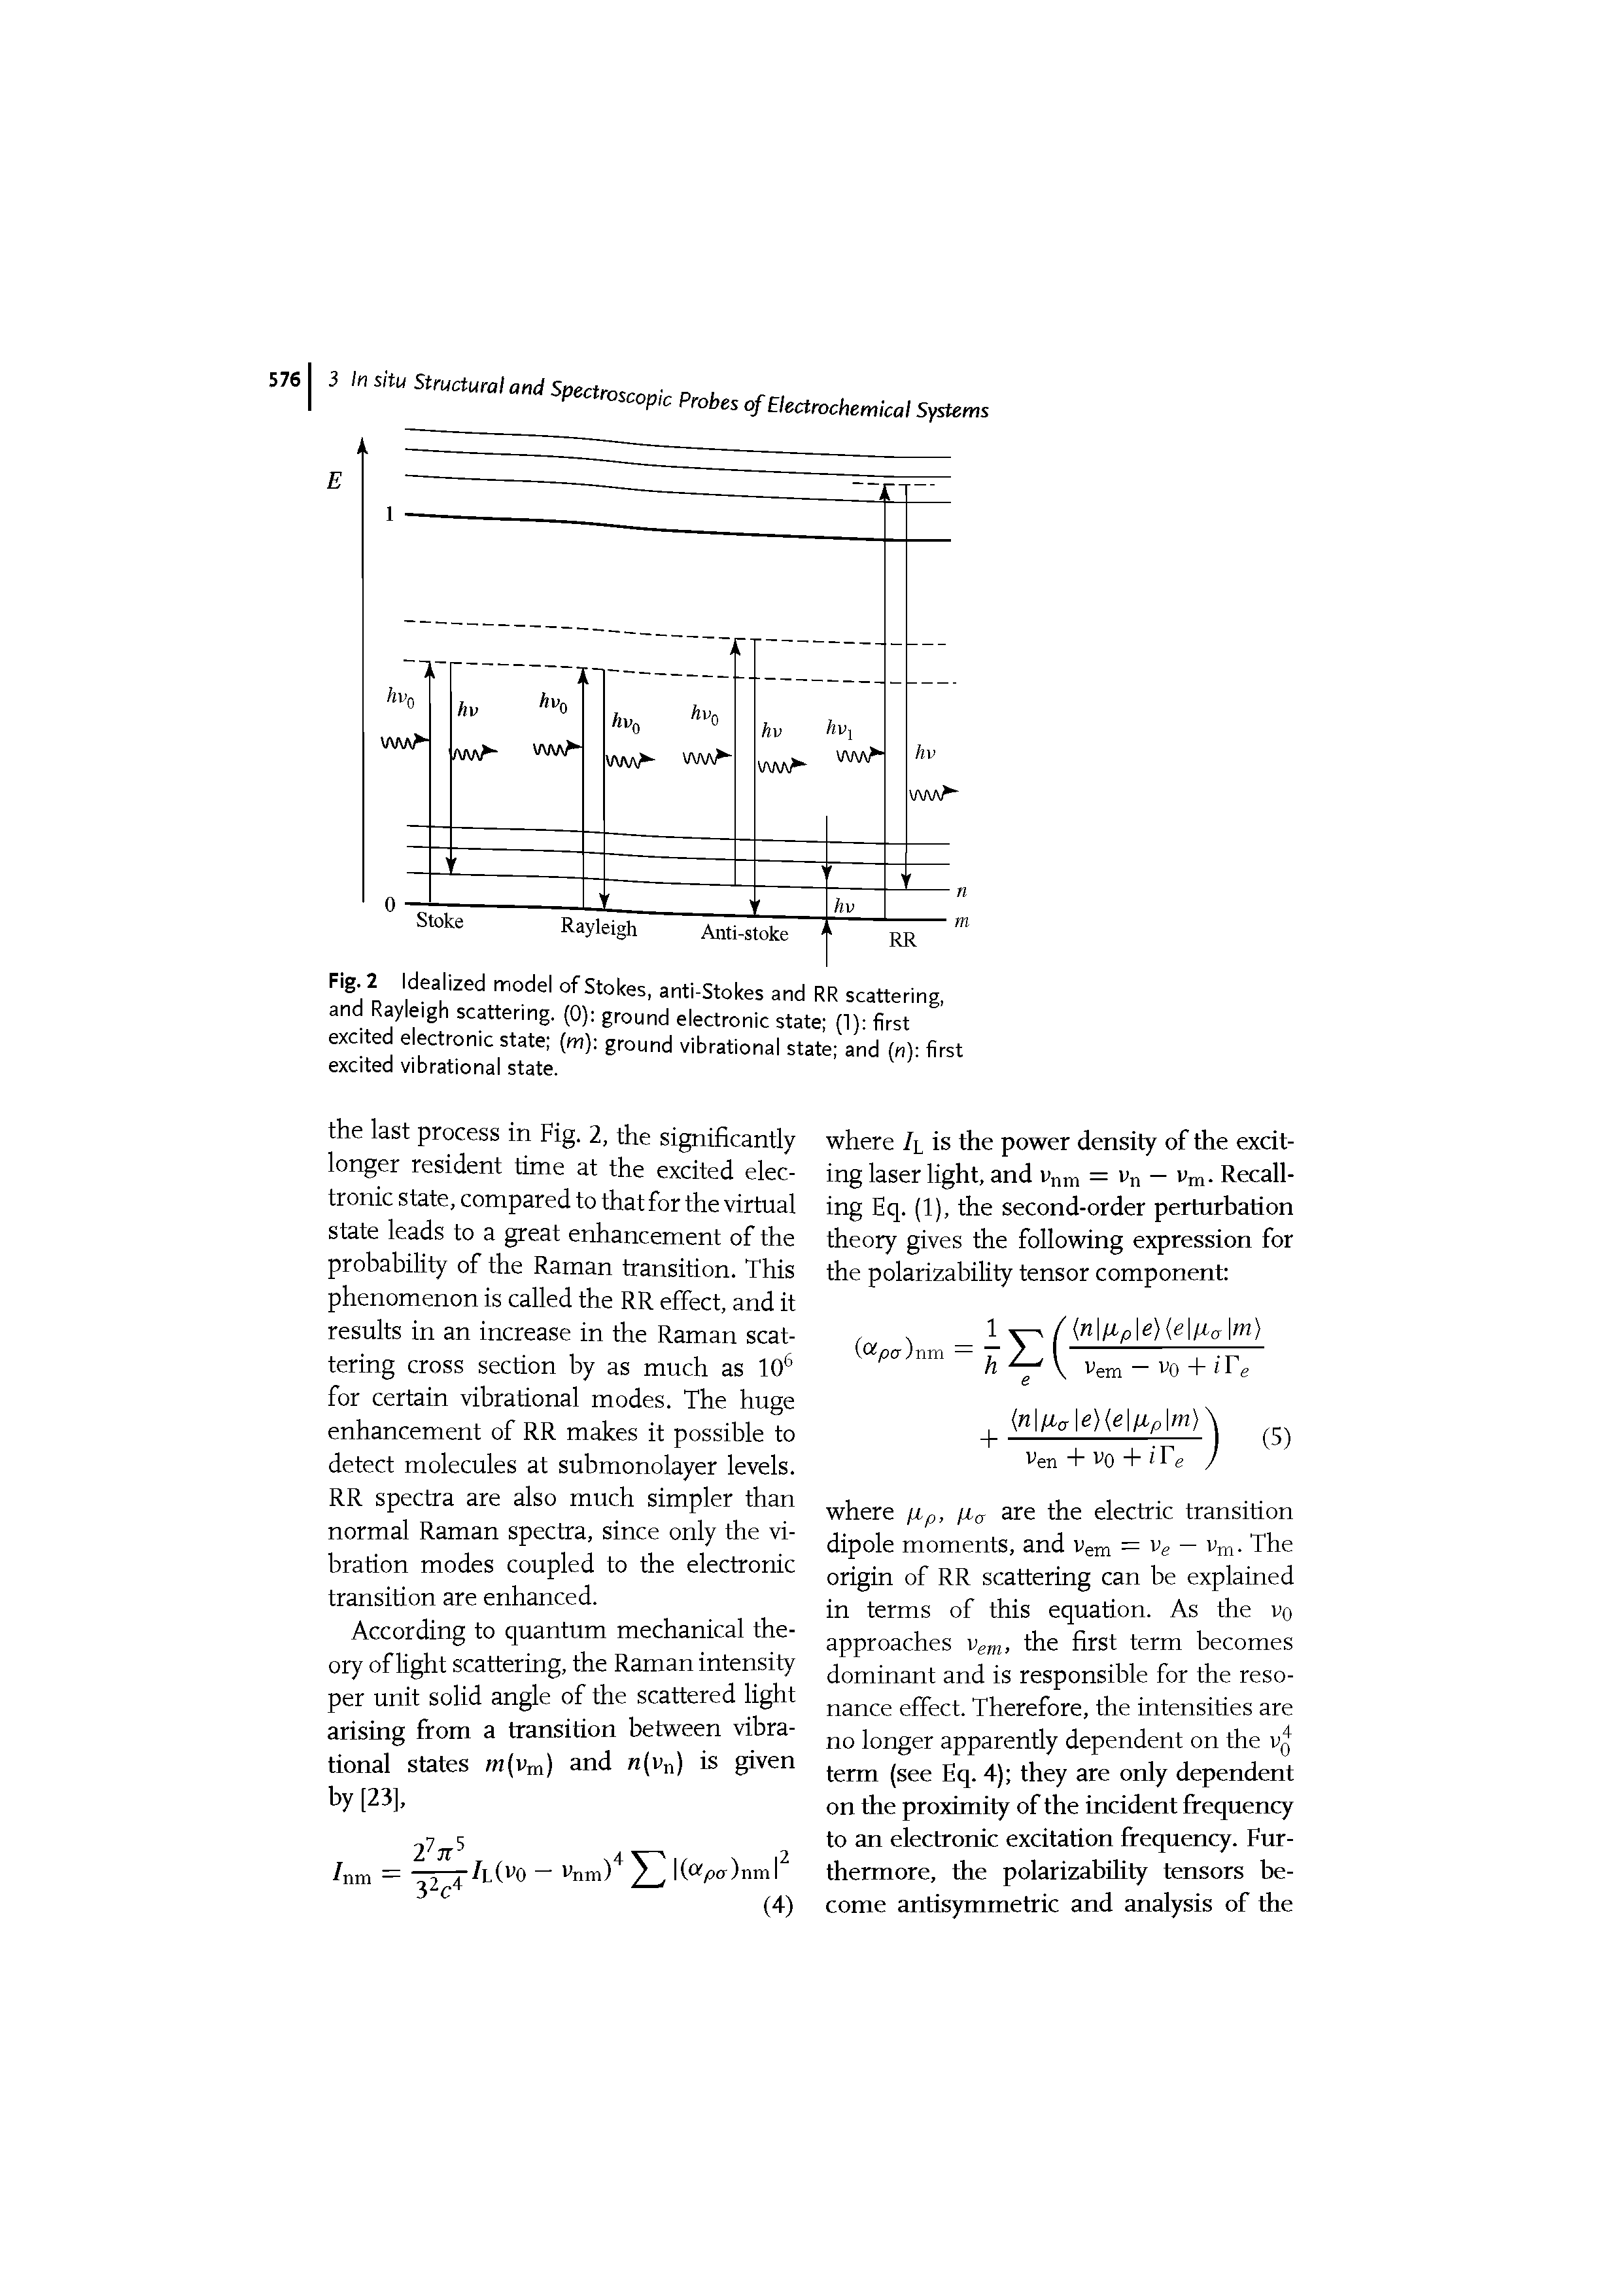 Fig. 2 Idealized model of Stokes. anti-Stokes and RR scattering and Rayleigh scattering. (0) ground electronic state (1) first excited electronic state (m) ground vibrational state and (n) first excited vibrational state.